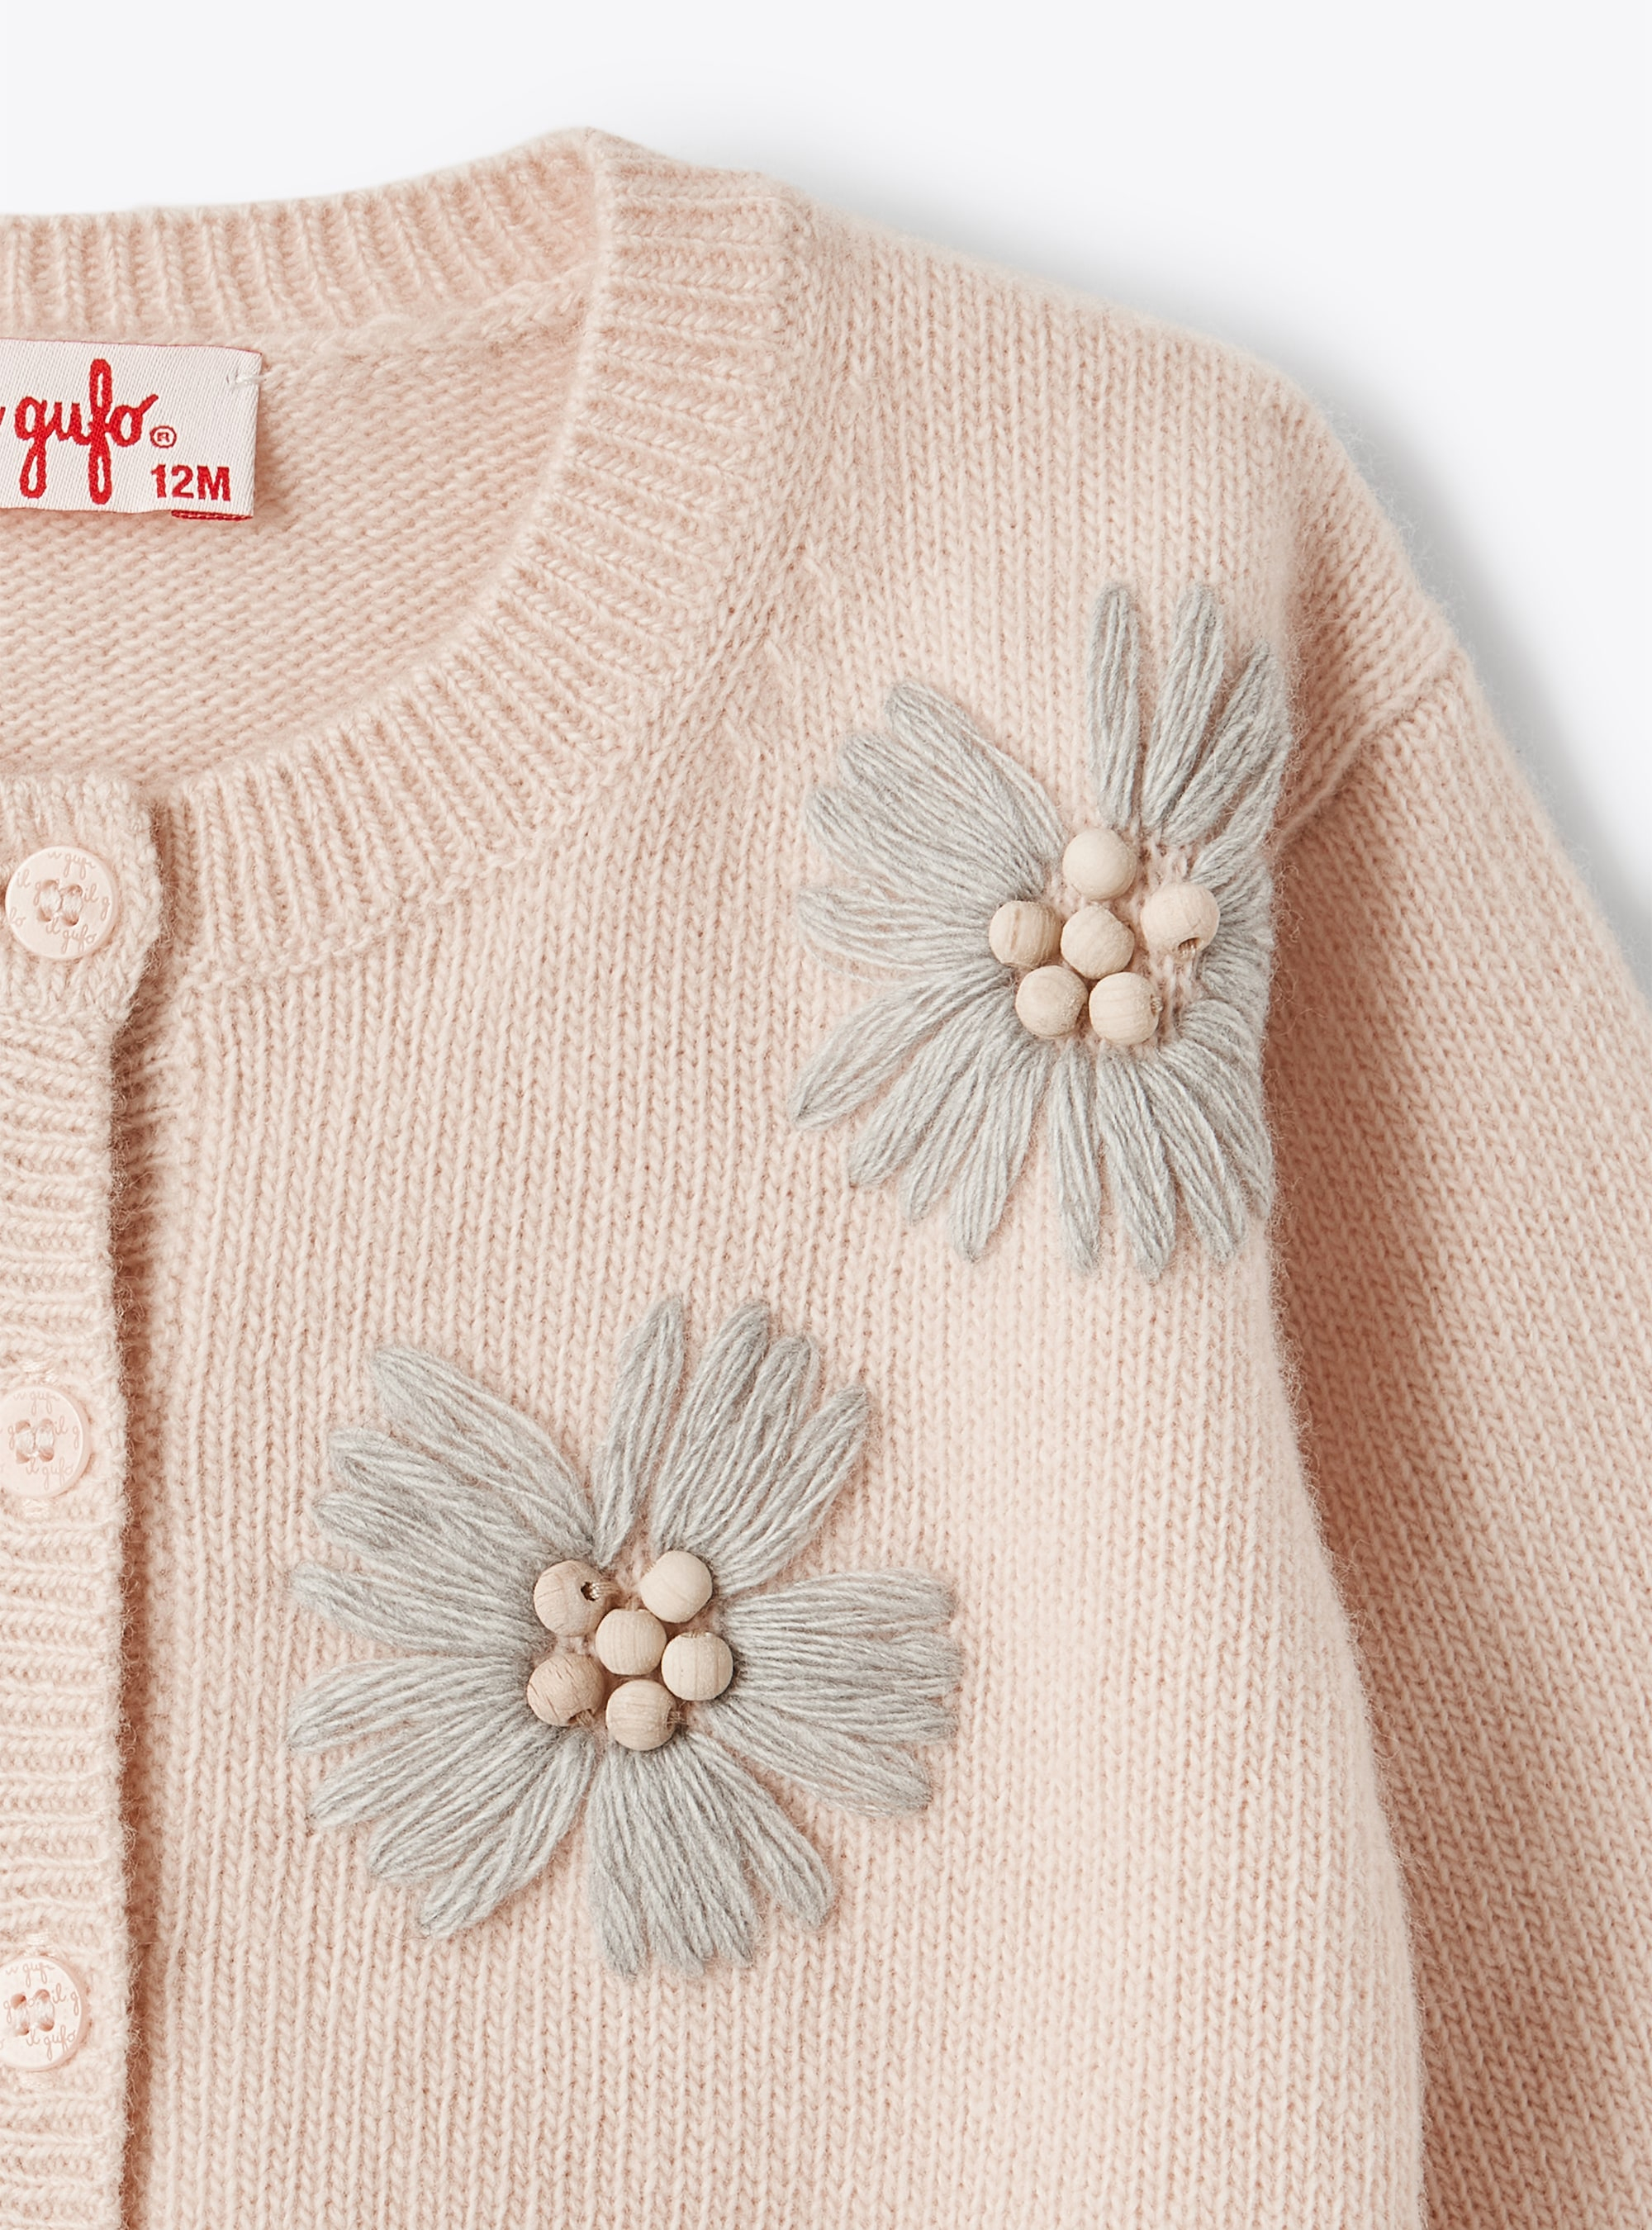 Quartz pink cardigan with embroidered flowers - Pink | Il Gufo